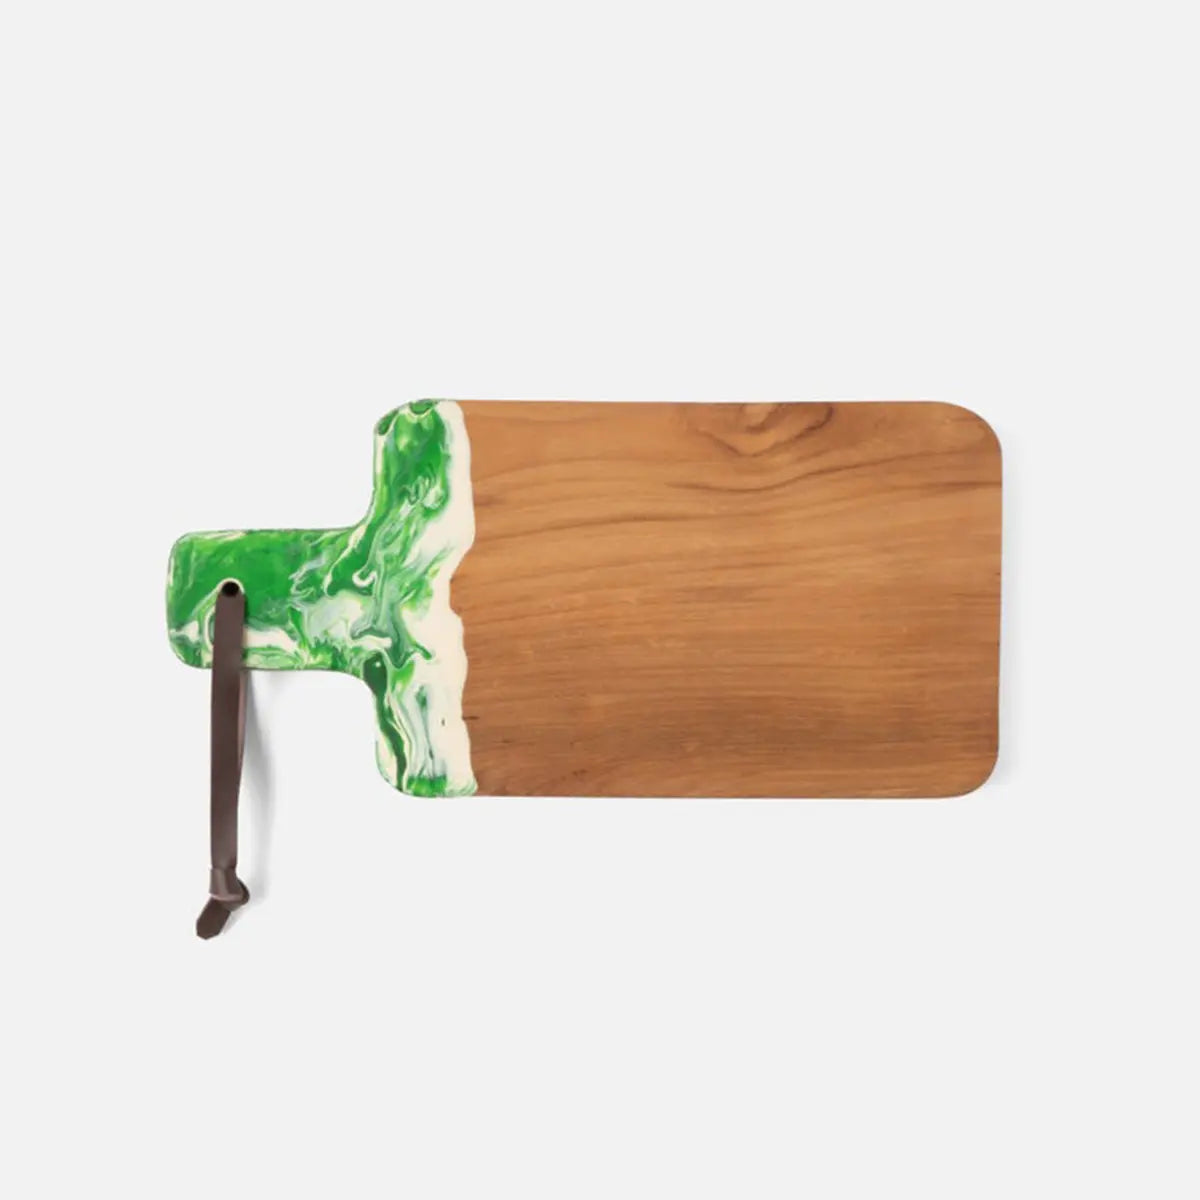 Blue Pheasant Austin Swirled Green Resin and Natural Teak Serving Board in Small Size